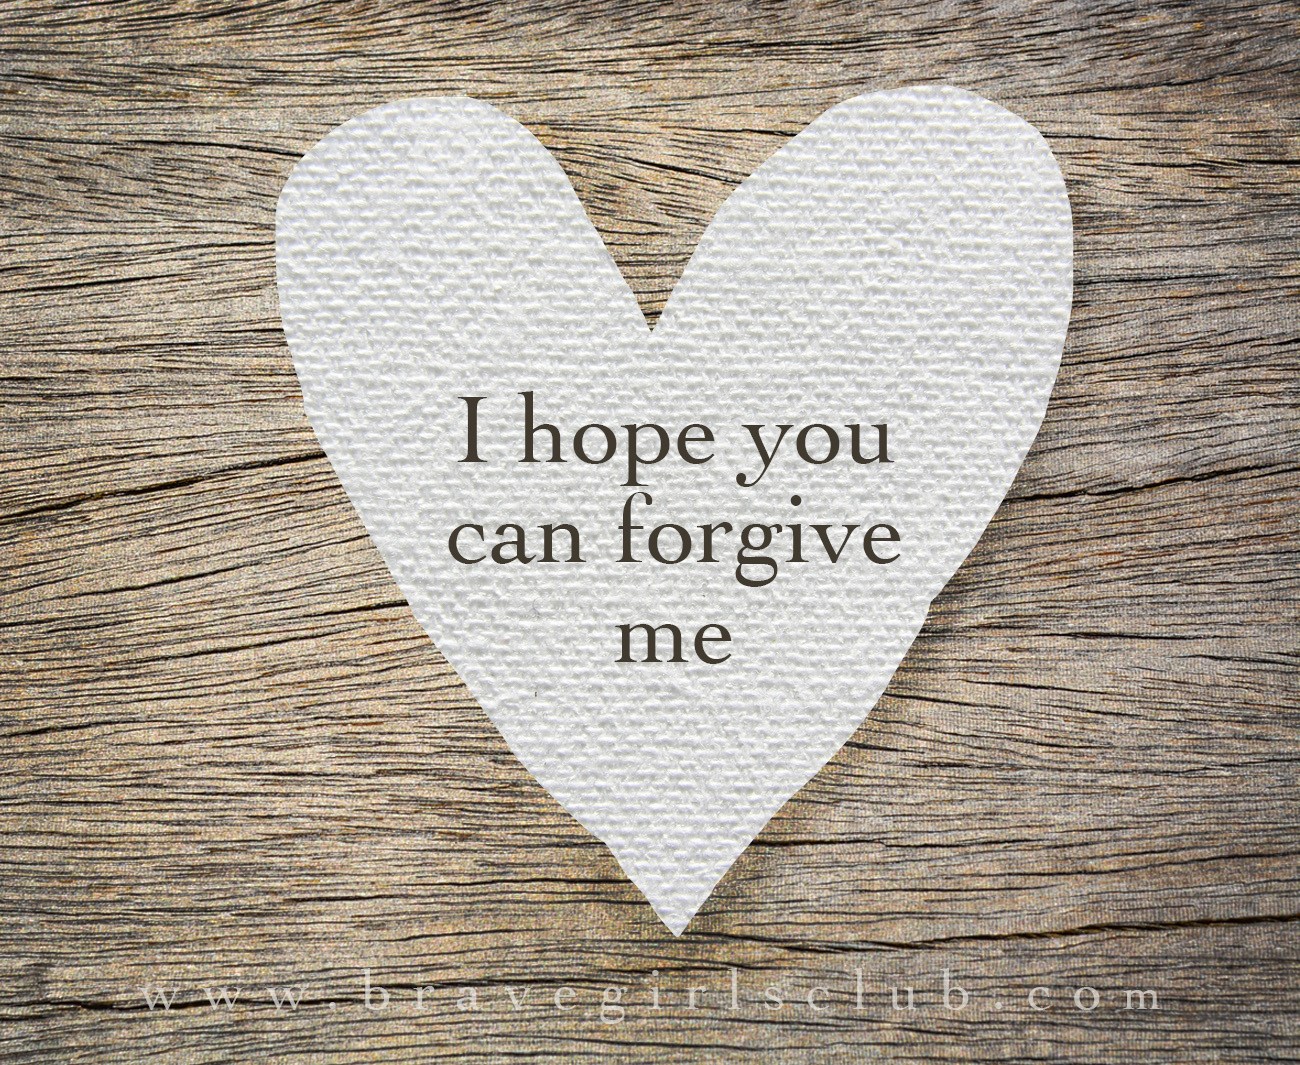 Forgive and forget or stick up for yourself